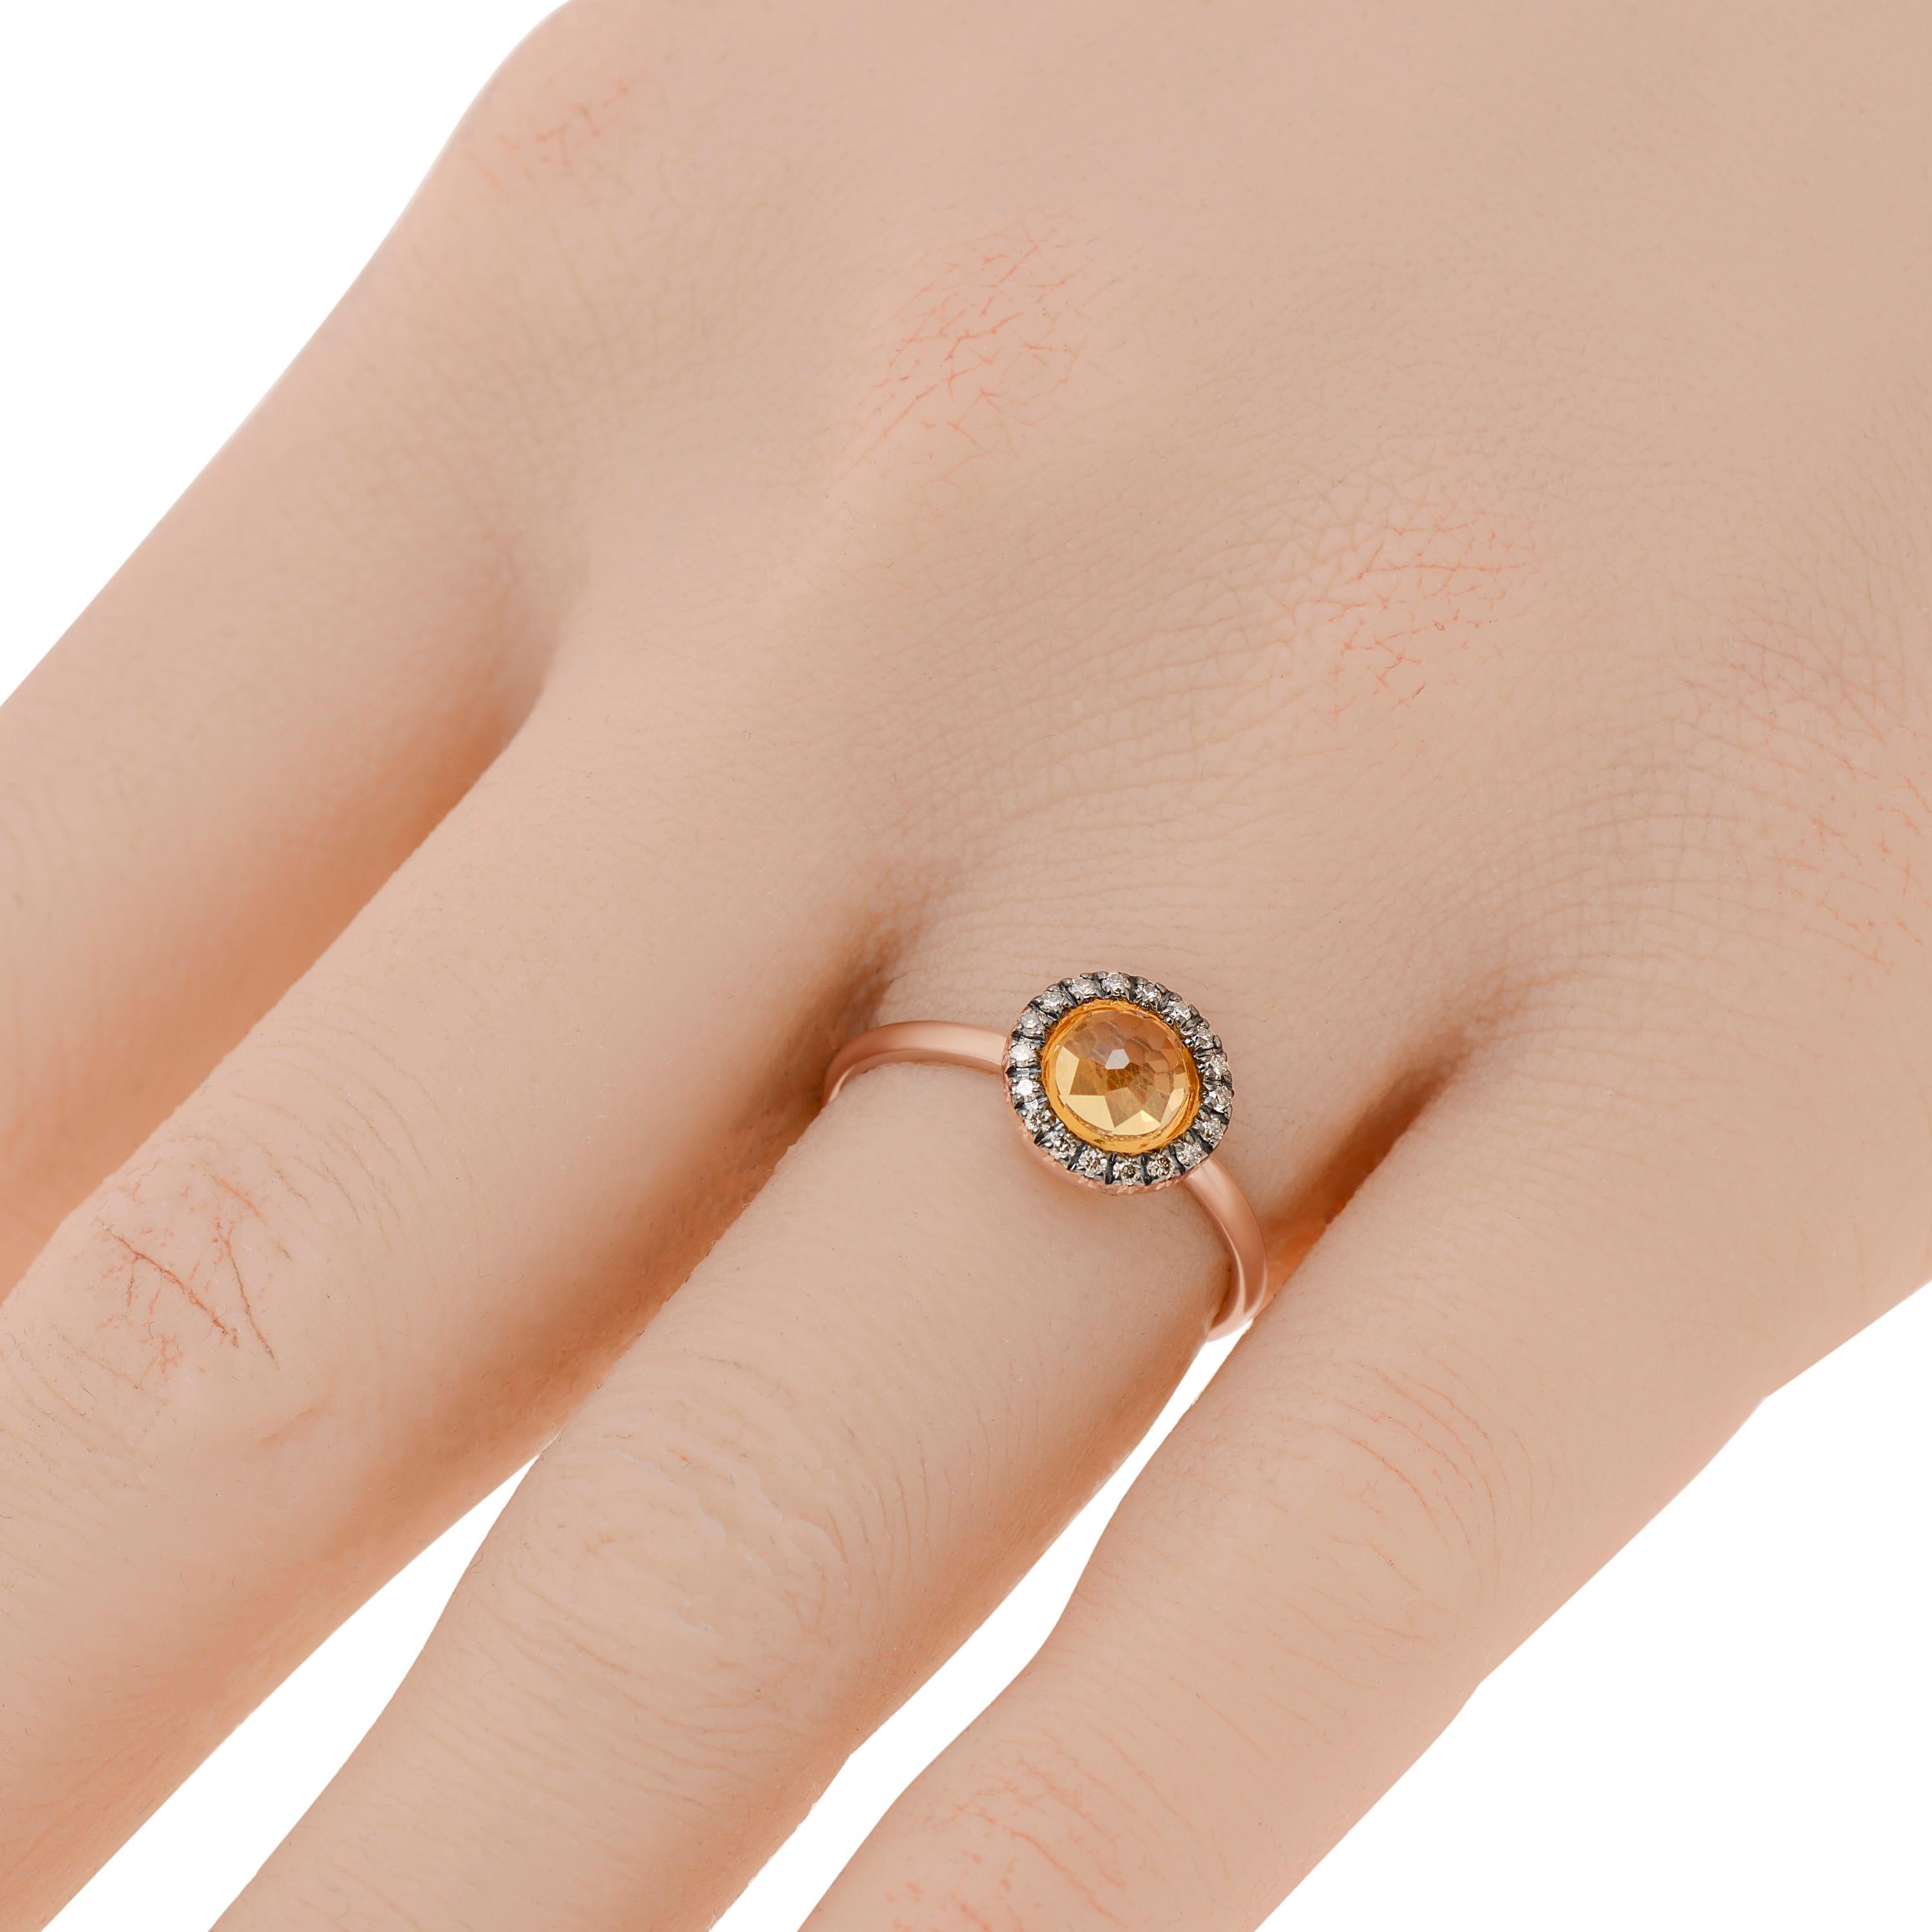 Mimi Milano 18K rose gold halo ring features a faceted Citrine center shimmering with a 0.12ct. tw. brown diamond halo. The ring size is 5.75 (51.3). The decoration size is 3/8